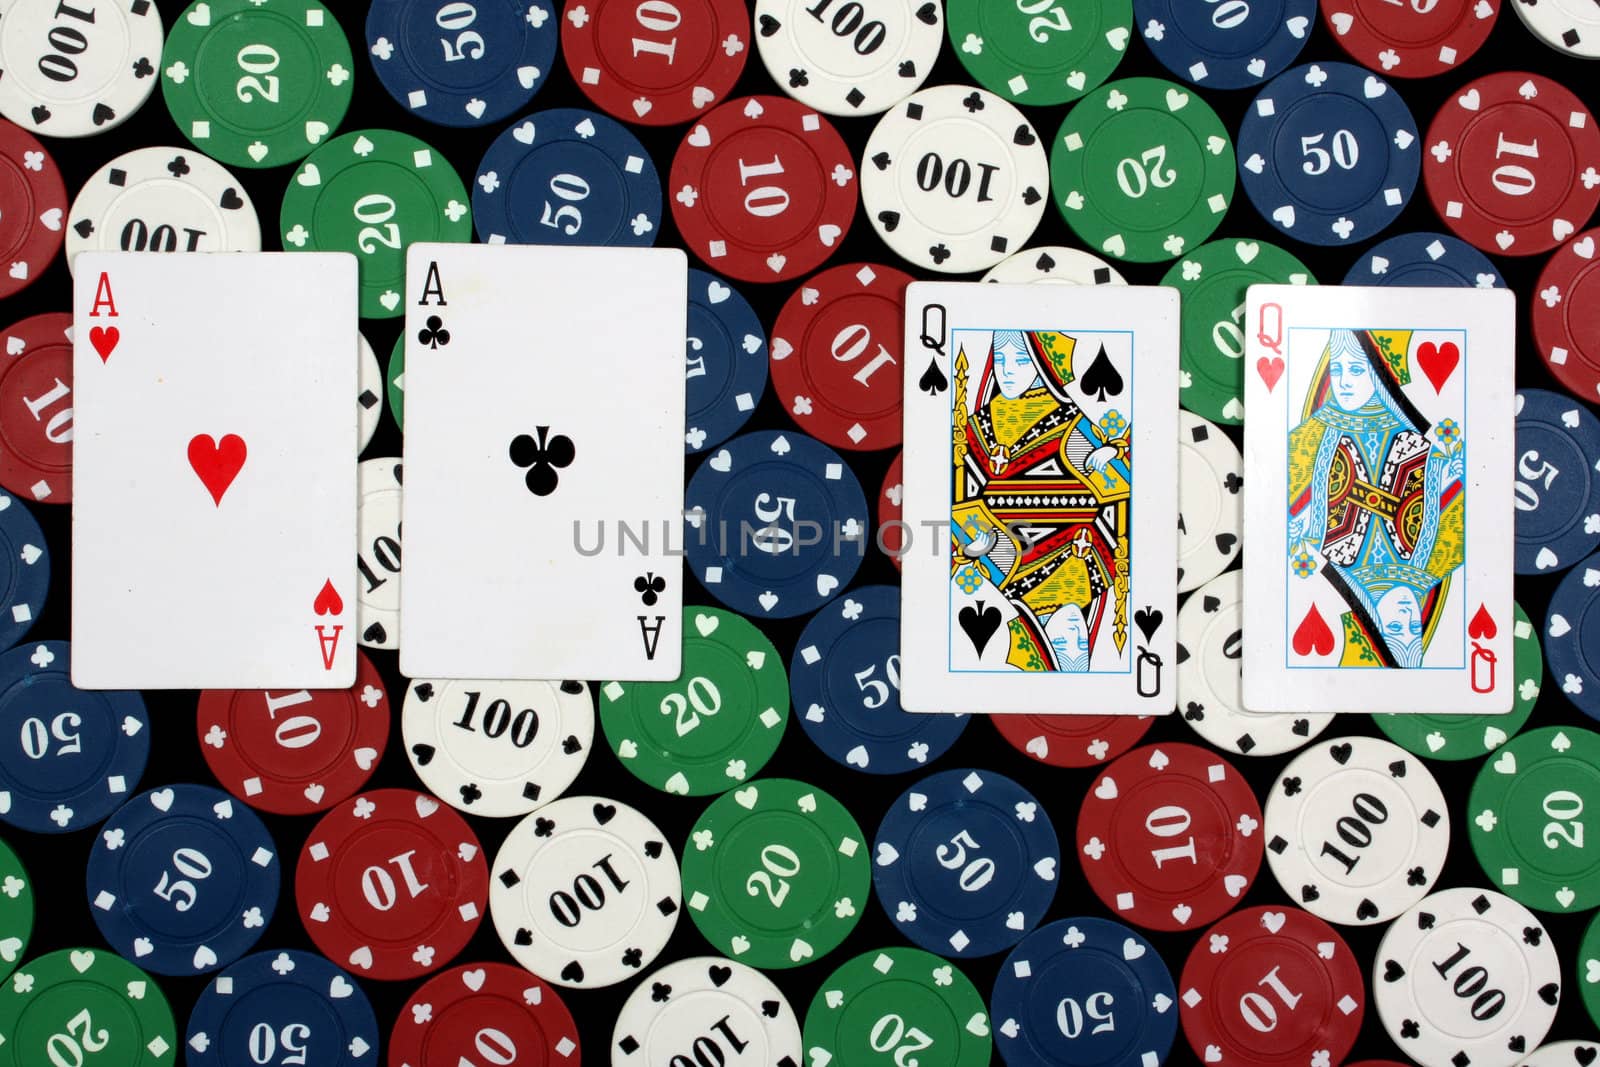 A poker hand of two pairs on a pattern of colorful gambling / casino chips.